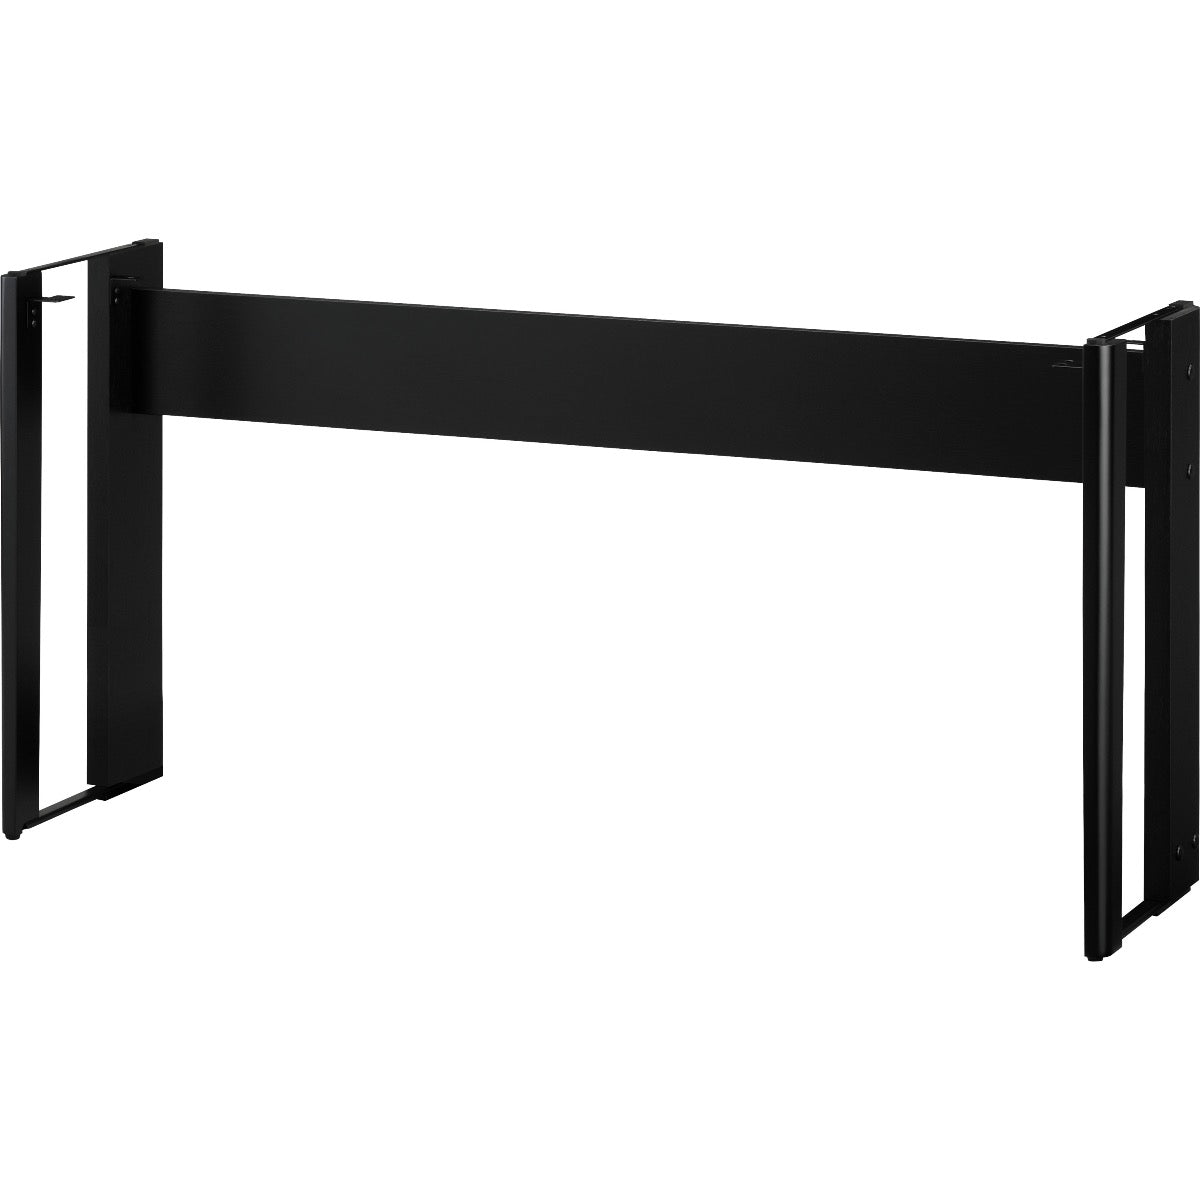 3/4 view of Kawai HM-5 Designer Stand - Black showing front, top and right side